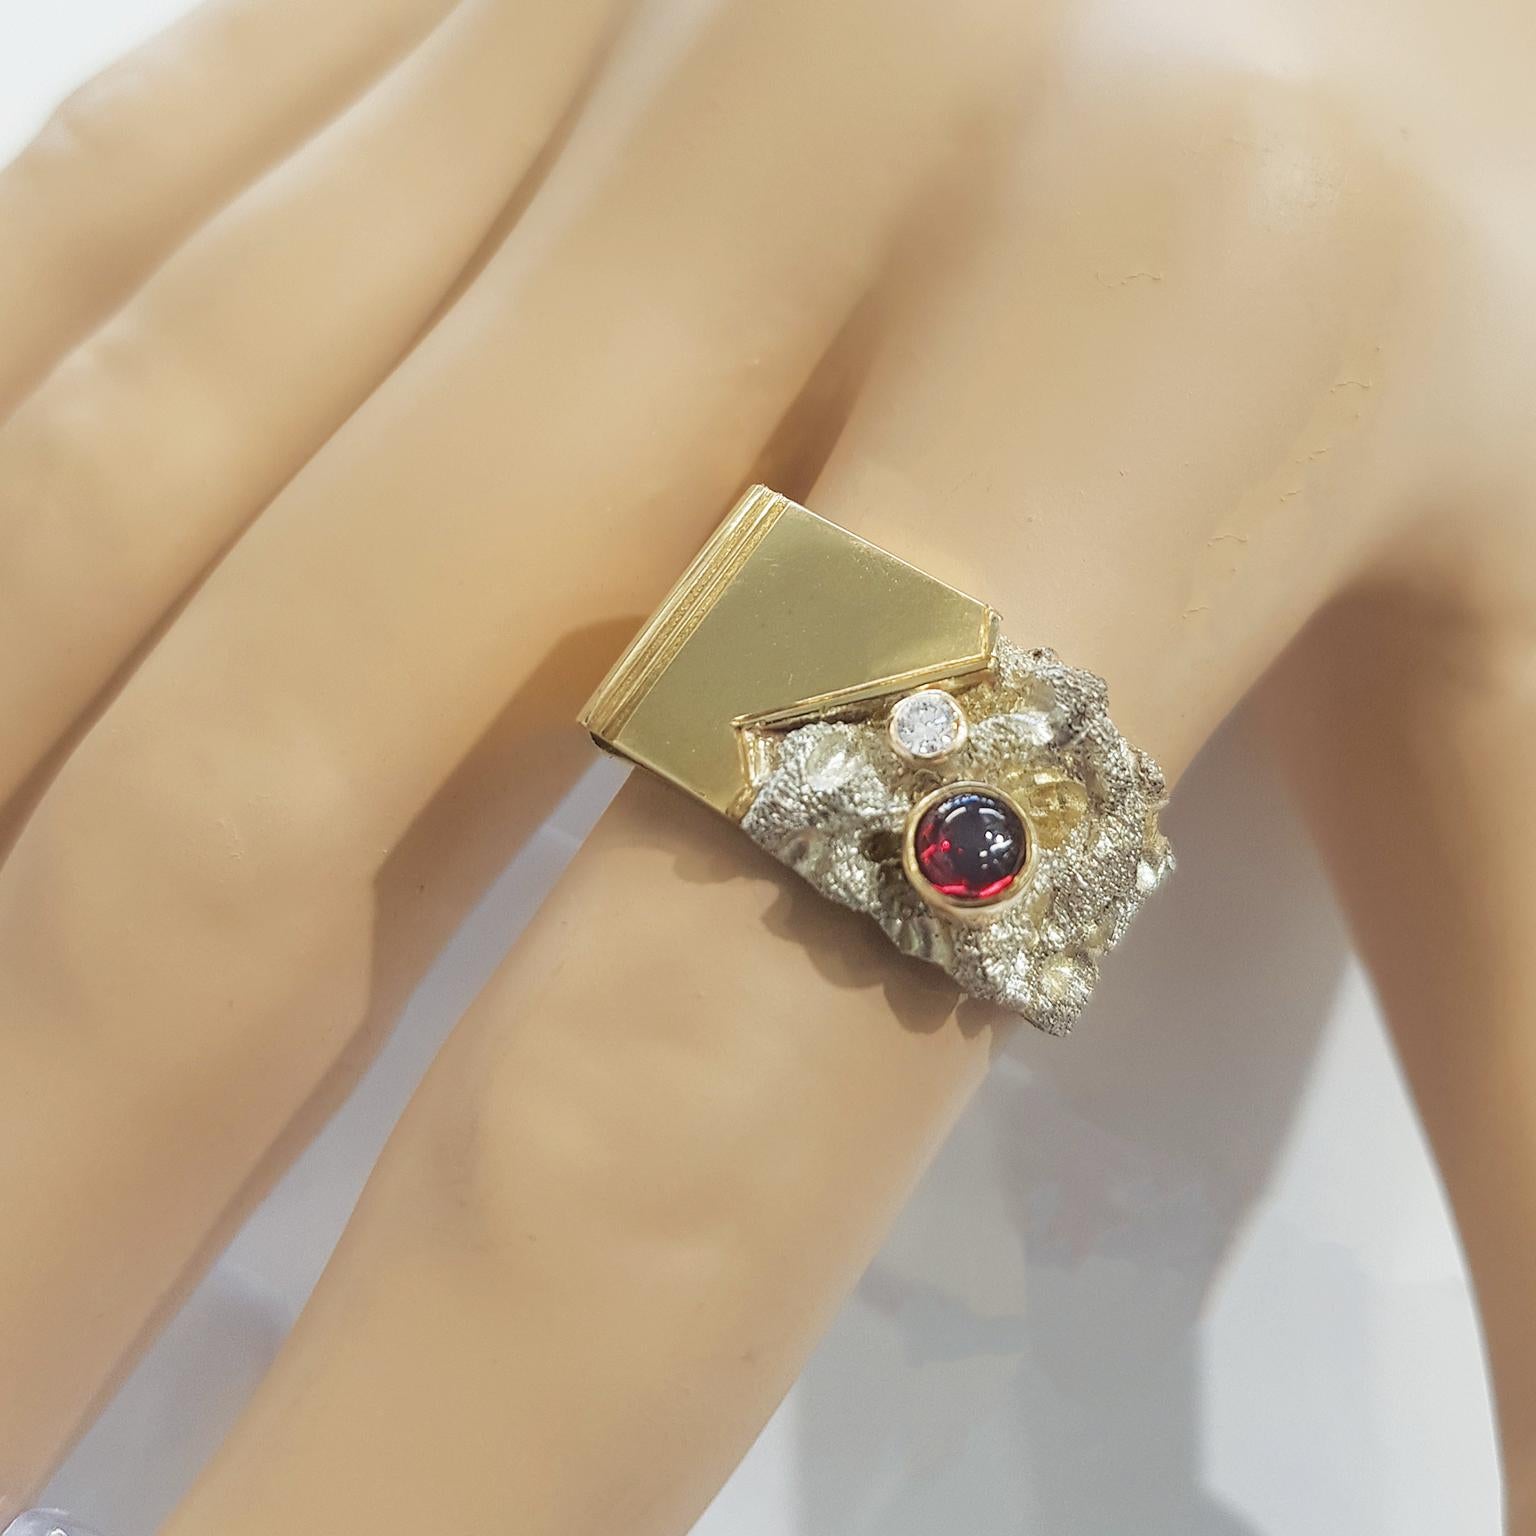 Paul Amey Gold, Sterling Silver, Diamond and Garnet Ring In New Condition For Sale In Tewantin, Queensland